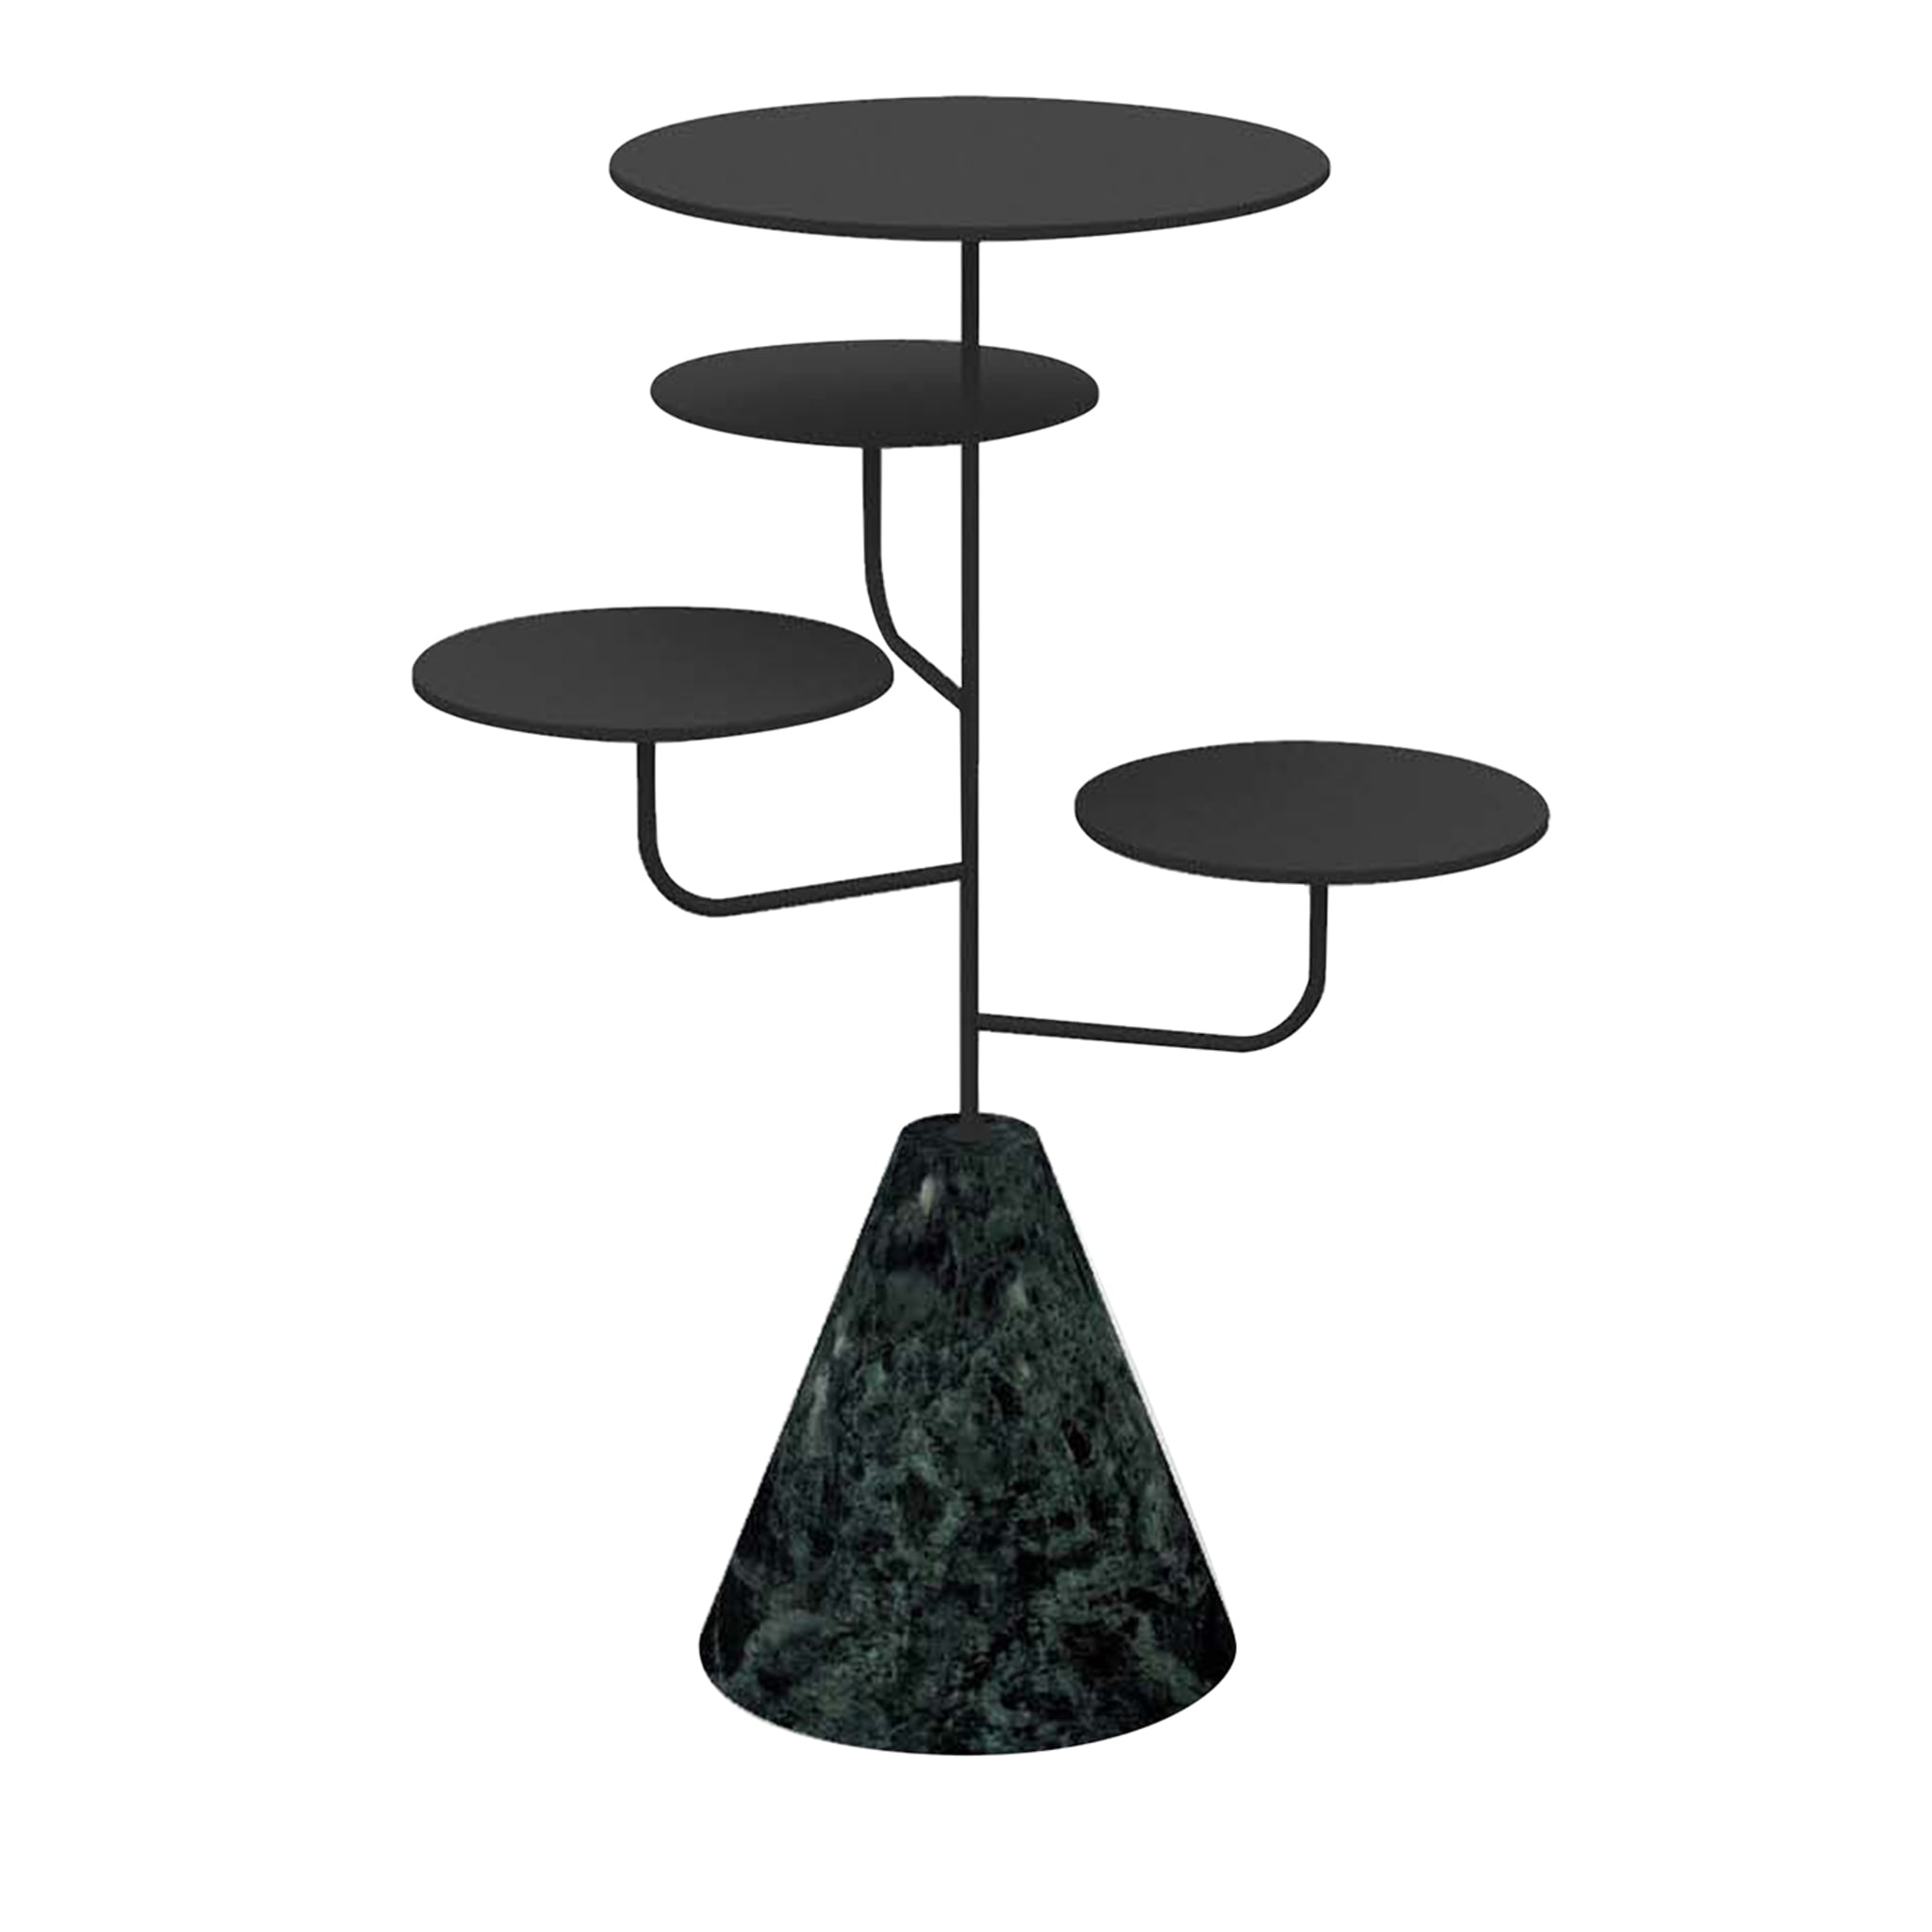 Condiviso 4-Tier Anthracite/Green Guatemala Serving Stand - Main view